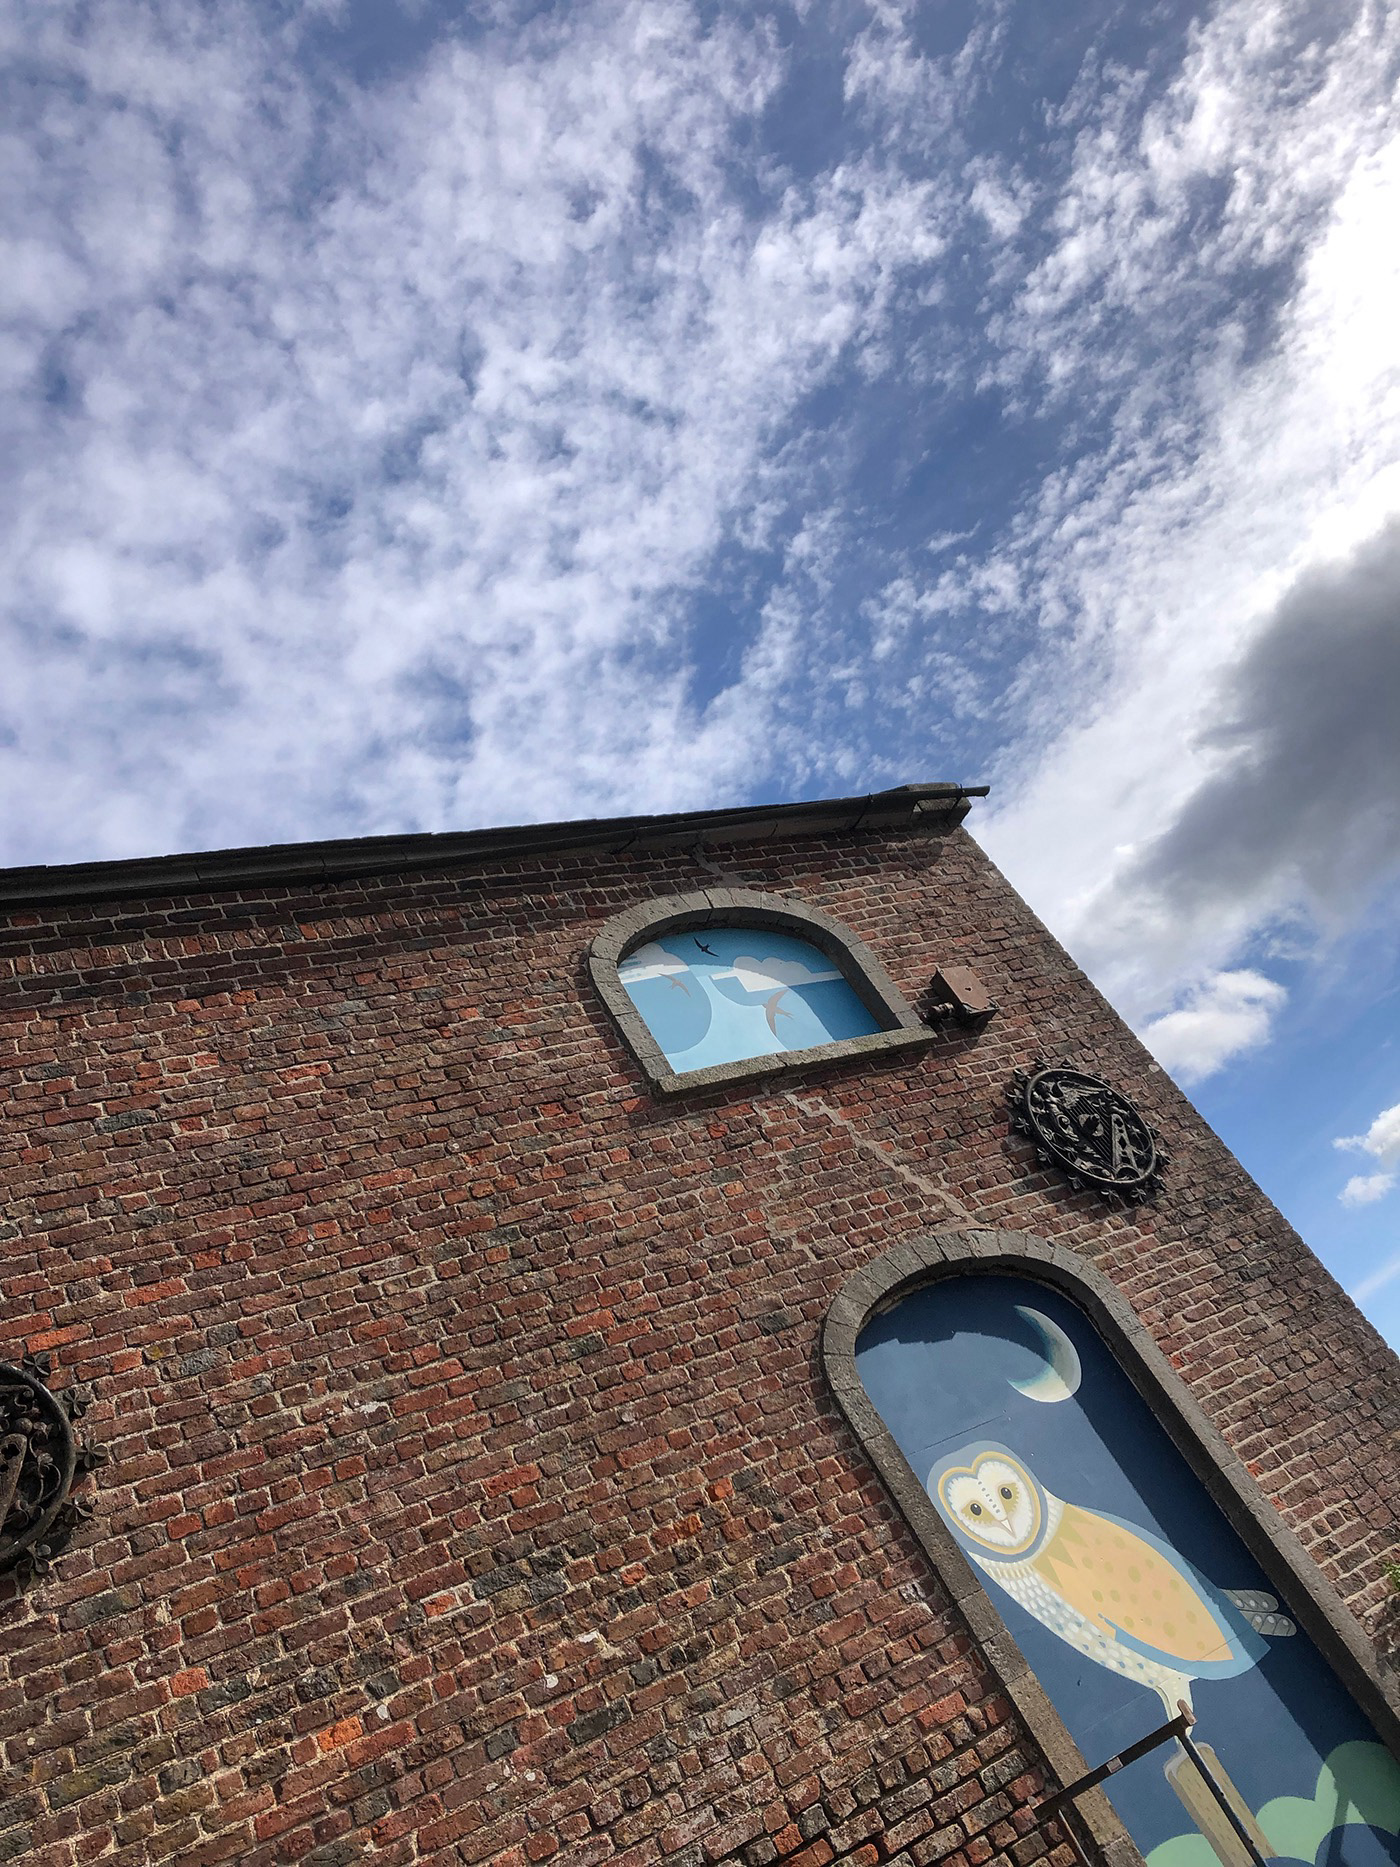 Swift and barn owl illustrations on outdoor panels for a heritage building